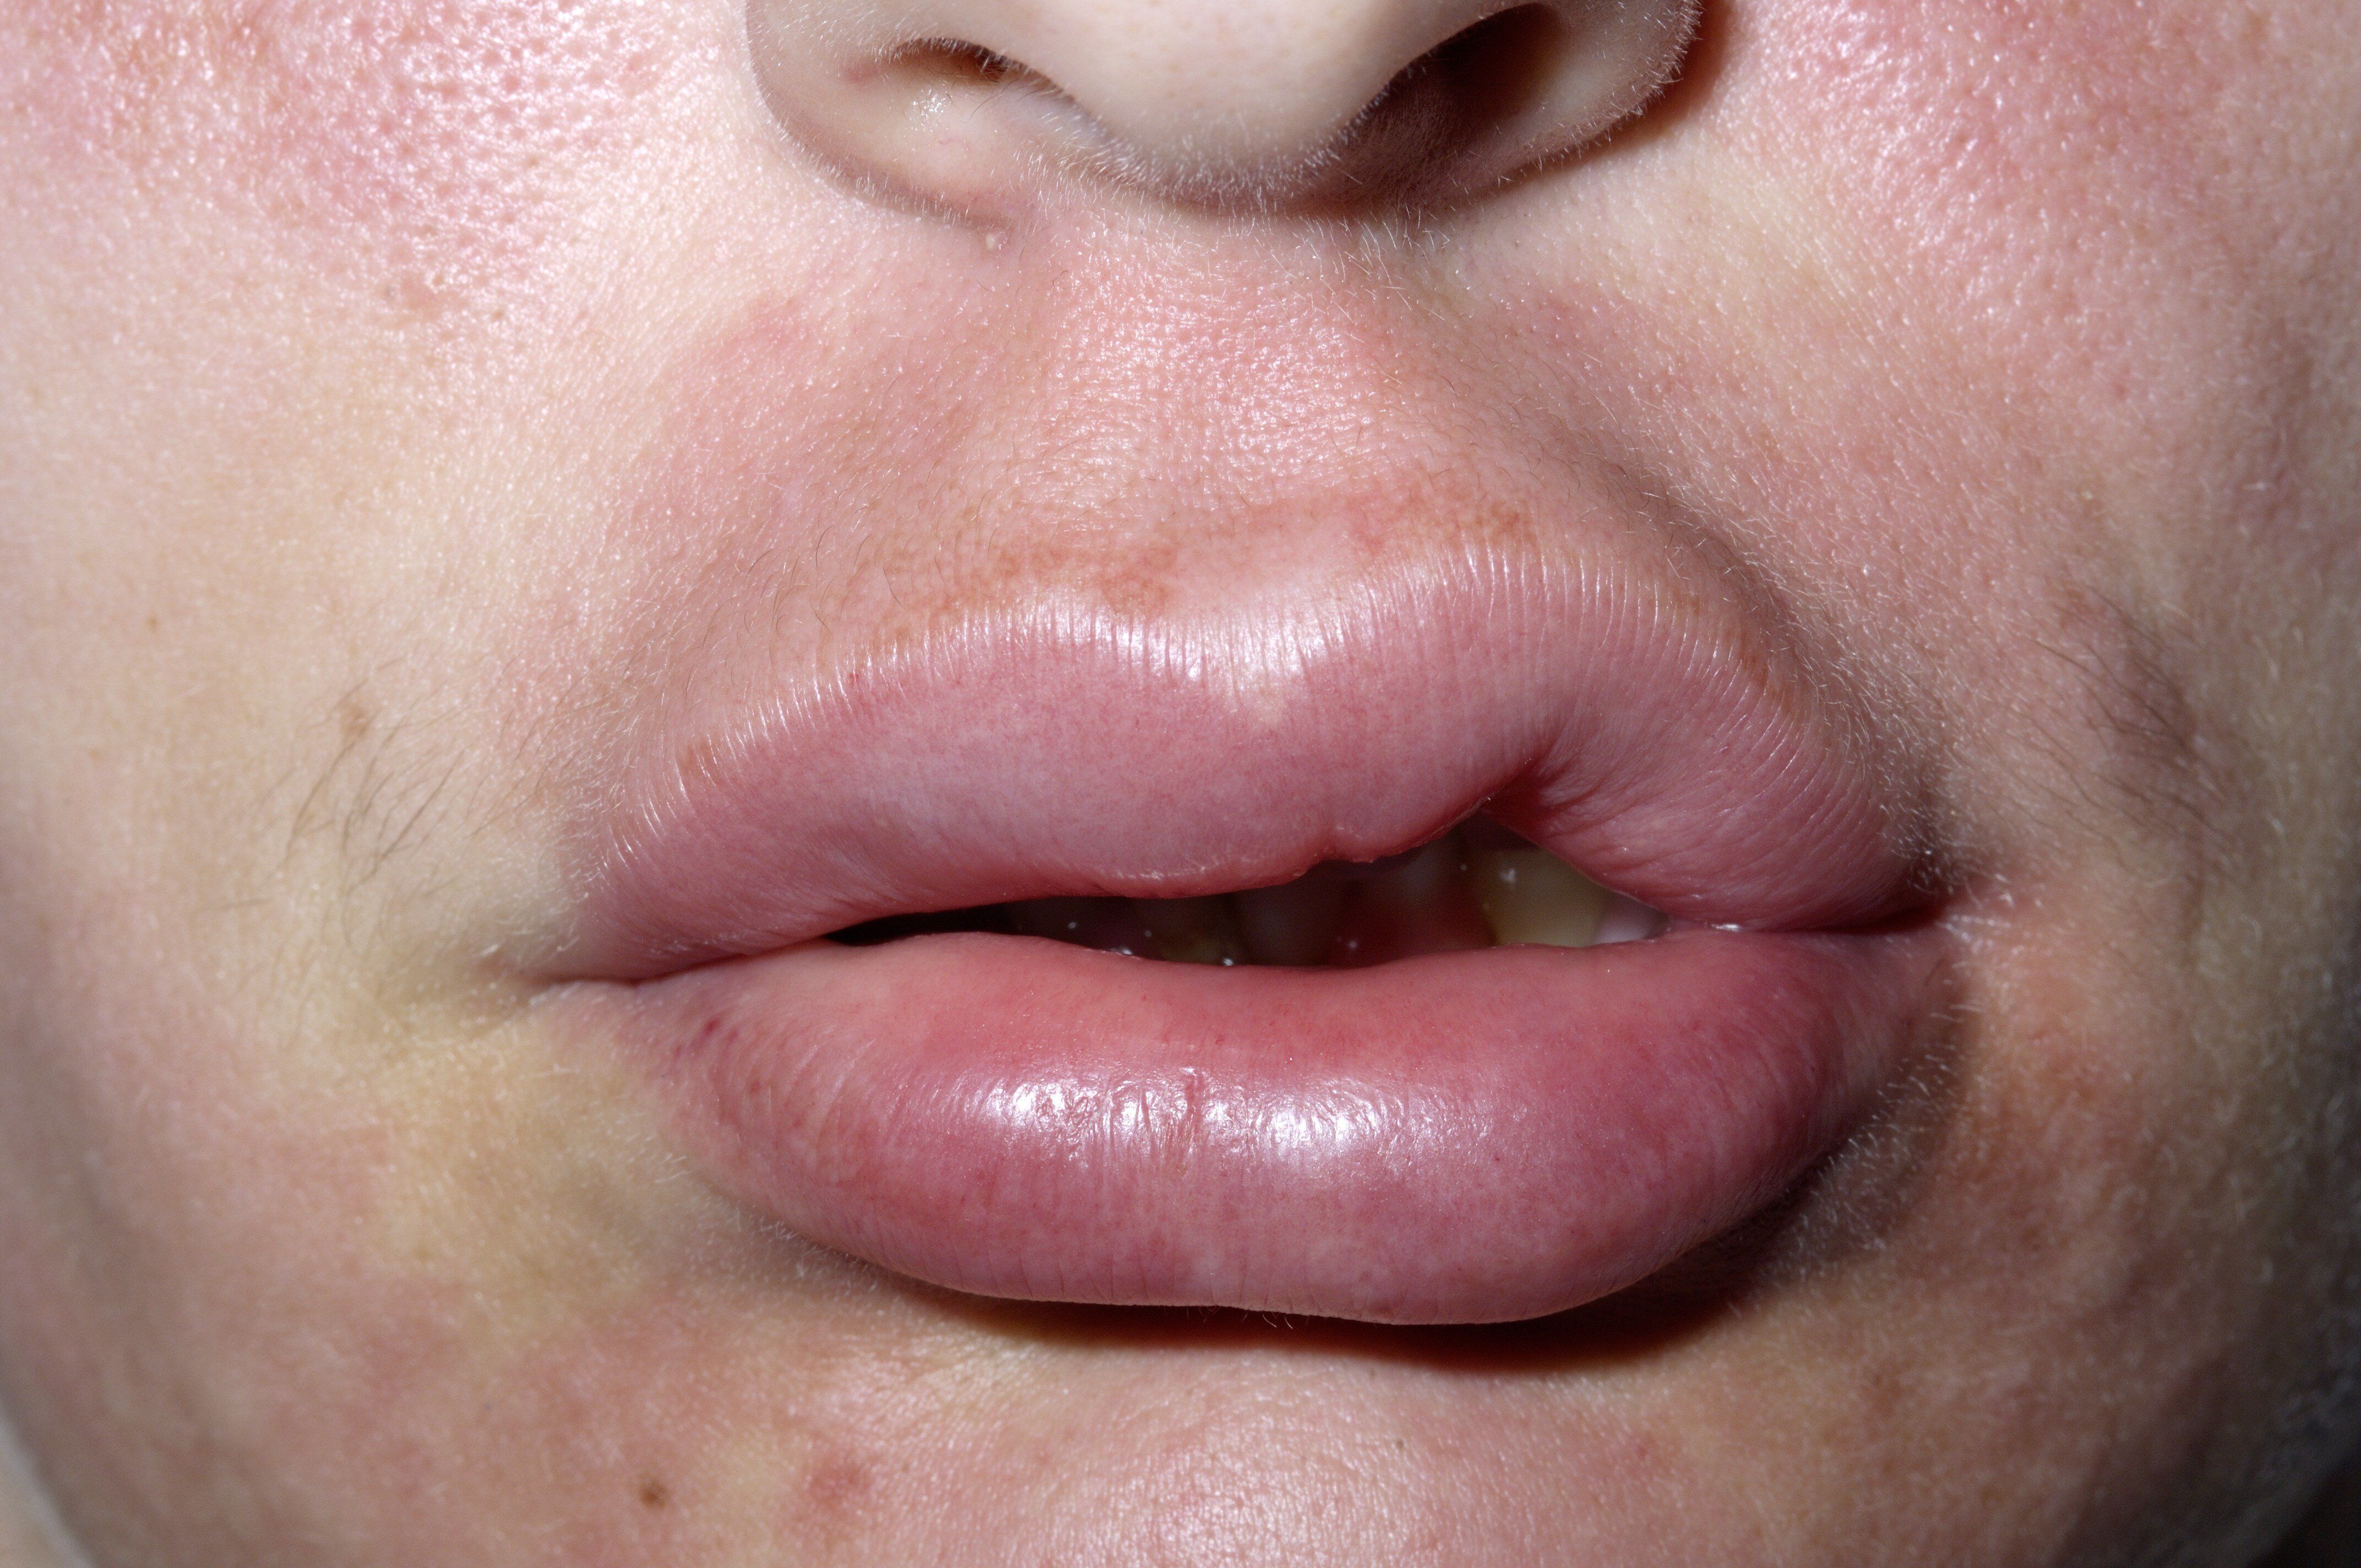 Facial swelling hives